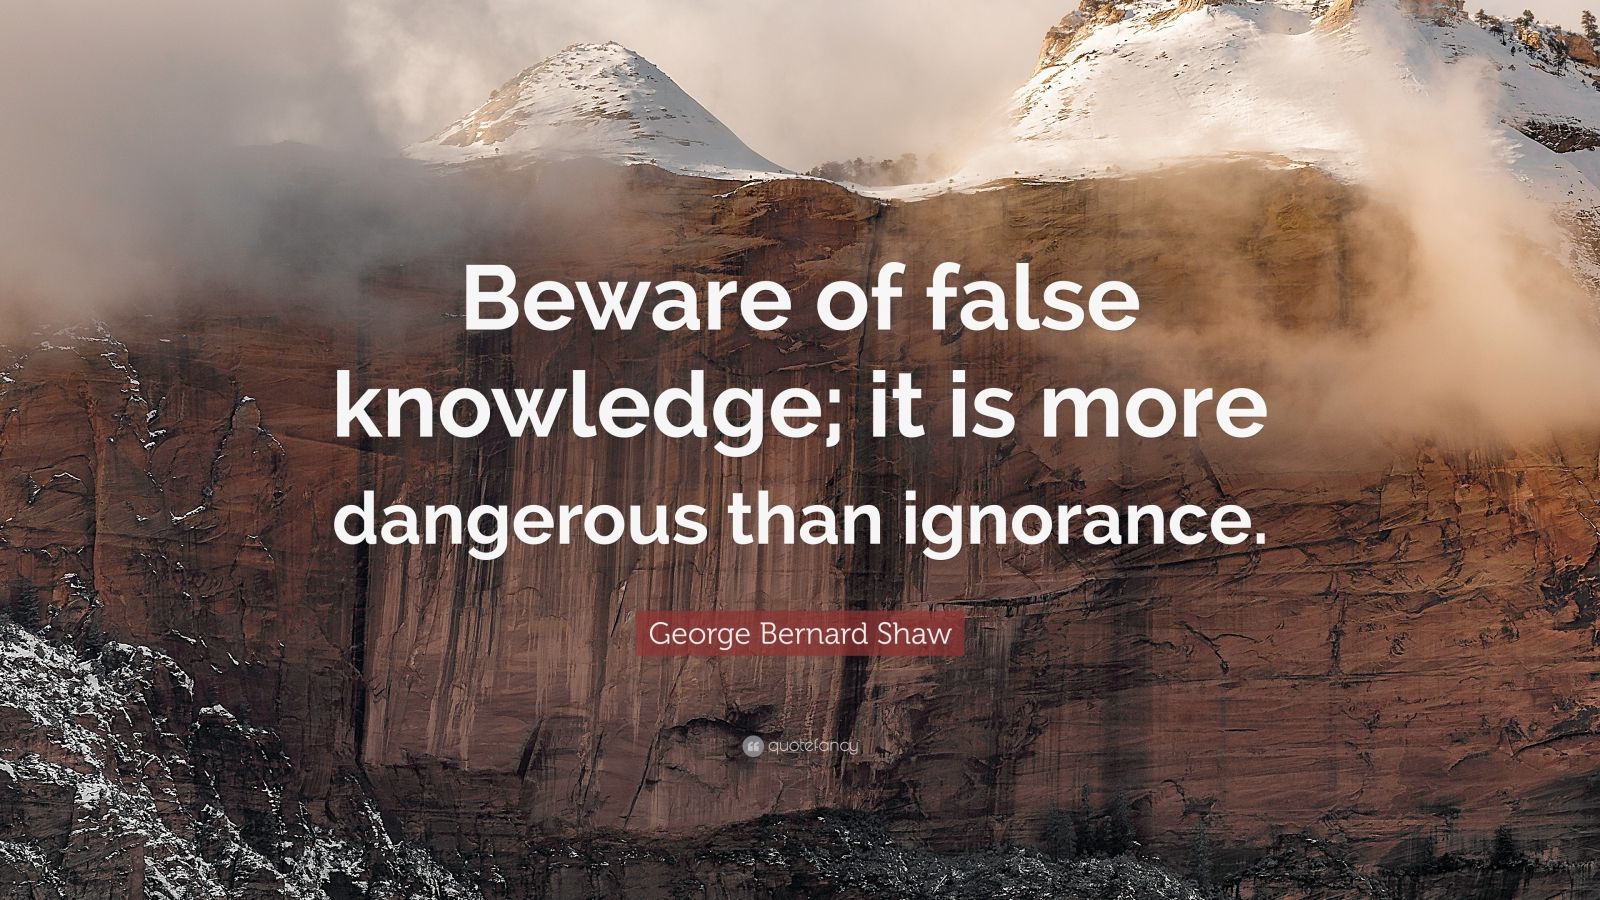 George Bernard Shaw Quote: “Beware of false knowledge; it is more